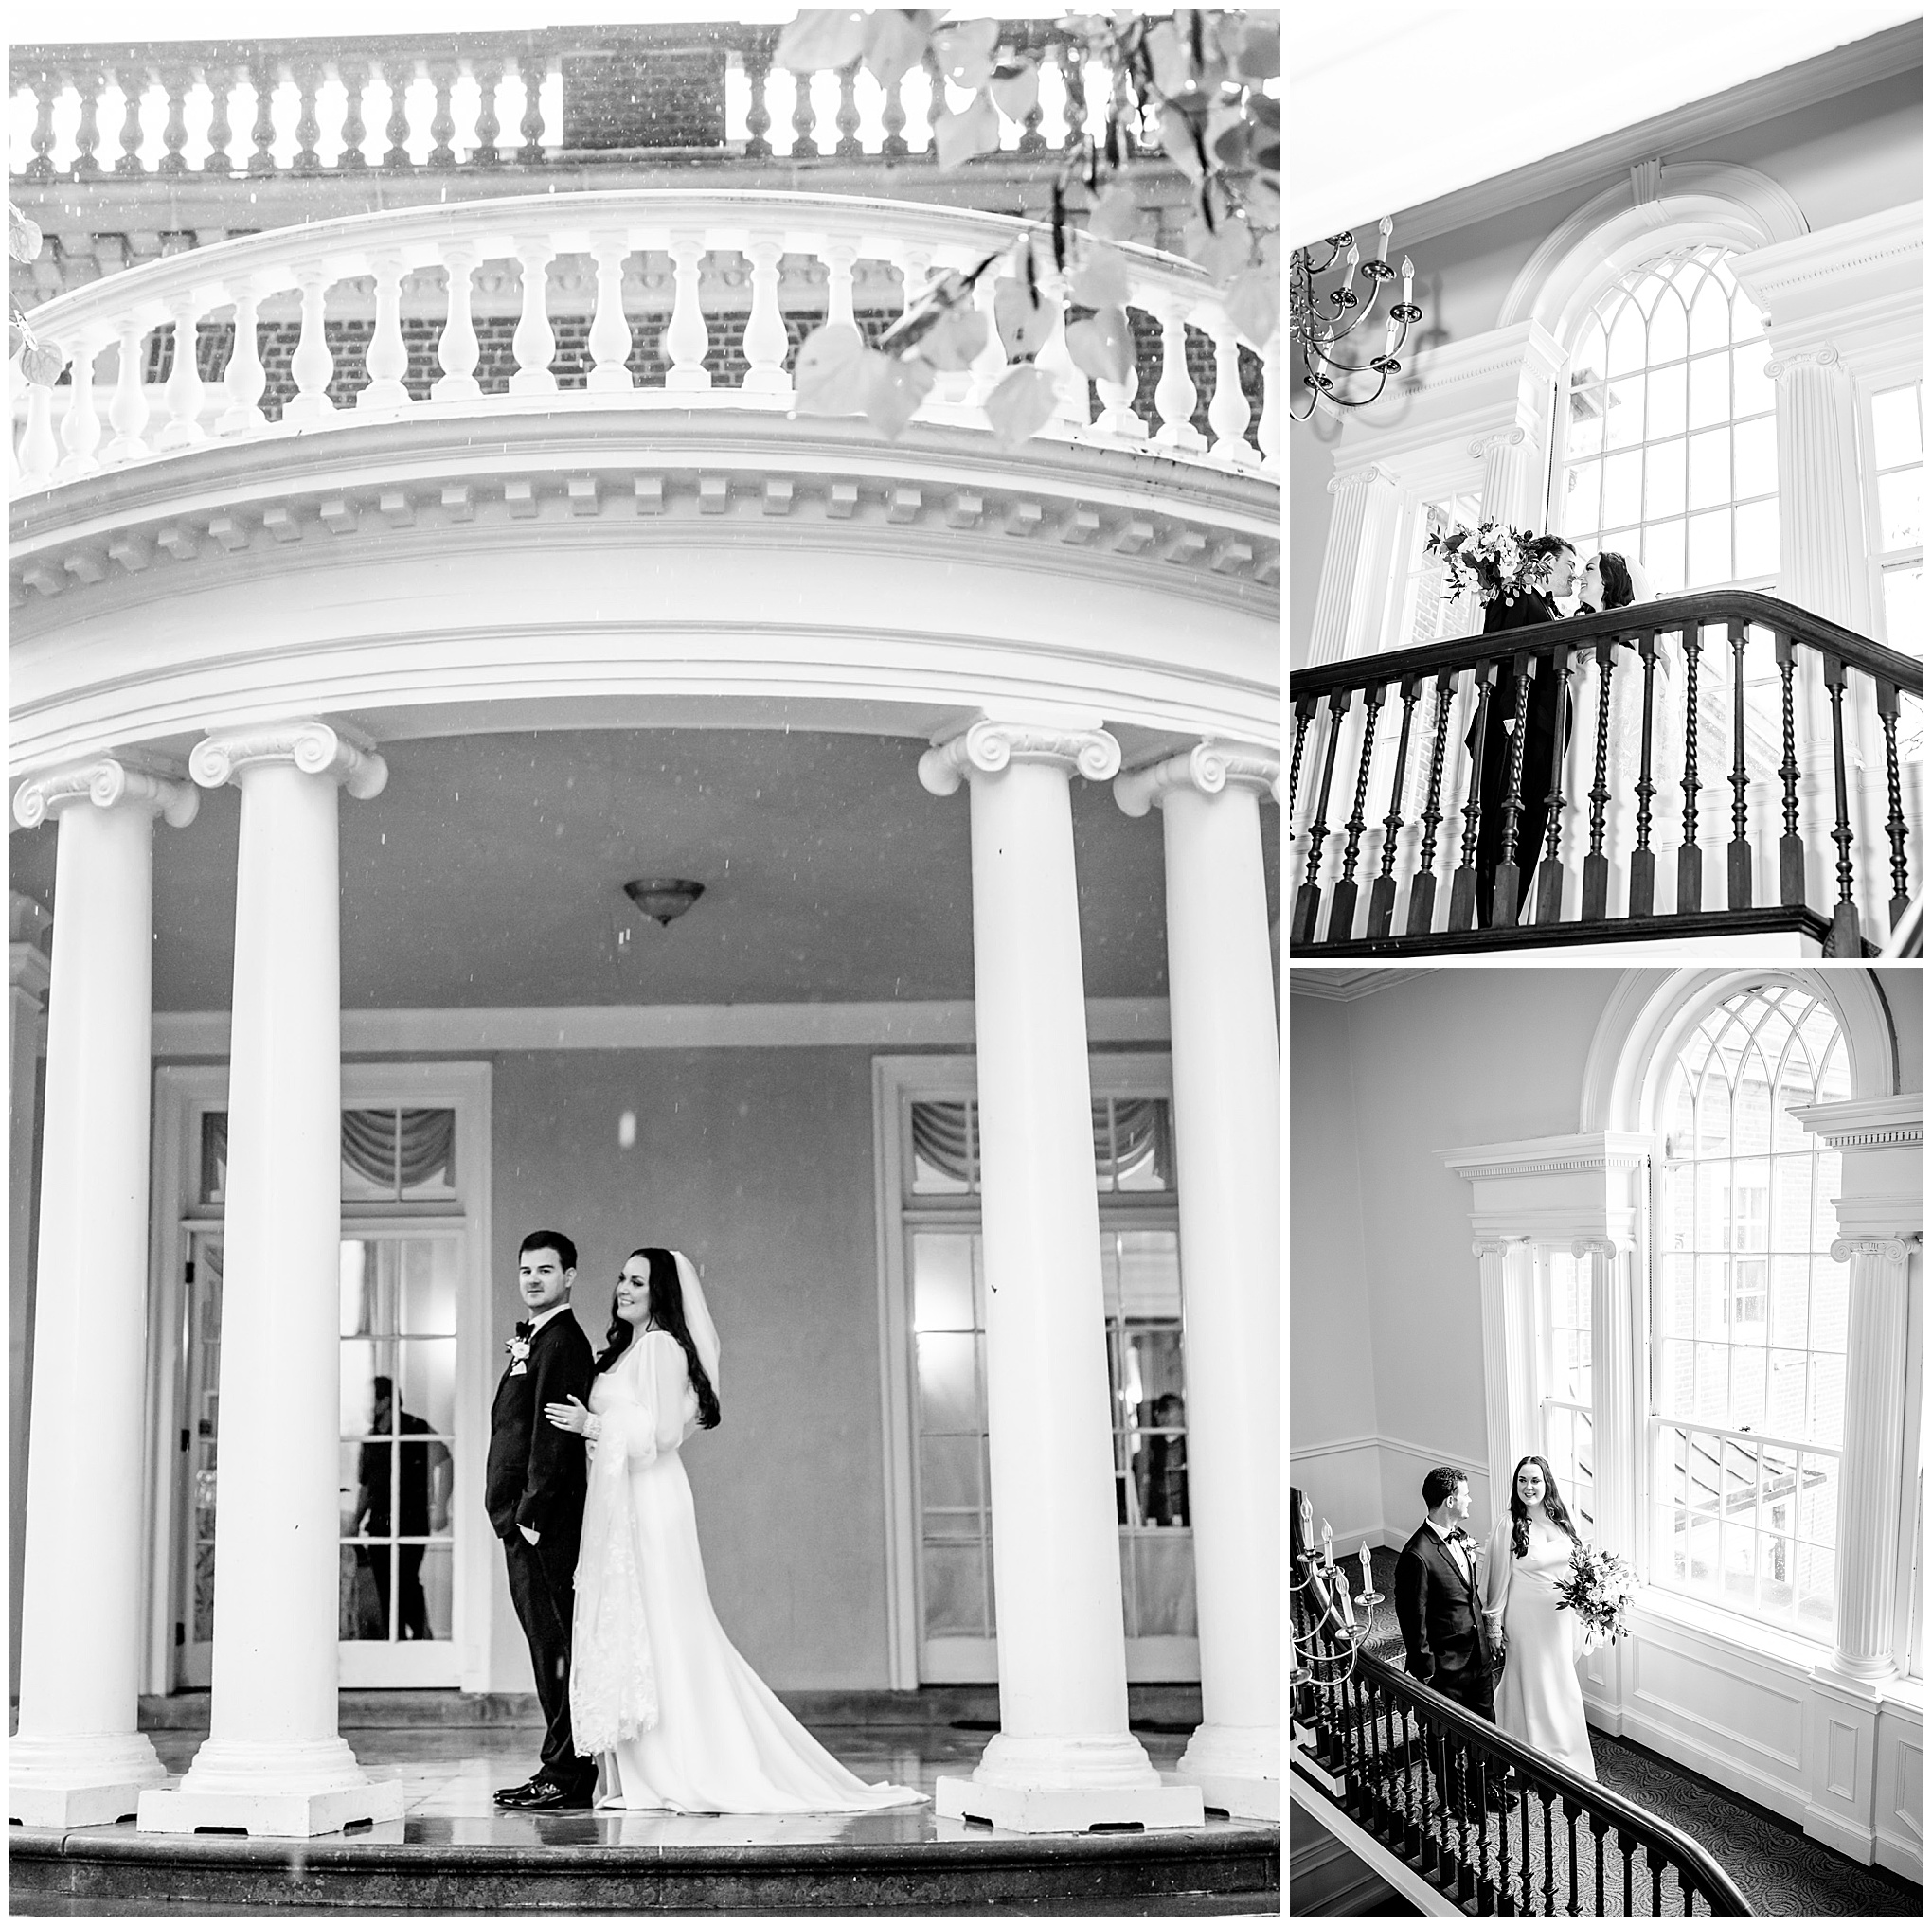 emerald and ivory Woodend Sanctuary wedding, autumn Woodend Sanctuary wedding, rainy day wedding, Maryland wedding venues, Chevy Chase MD wedding venue, mansion wedding, manor house wedding, indoor wedding, DC wedding venue, DC wedding photographer, Baltimore wedding photographer, Rachel E.H. Photography, emerald and ivory aesthetic, black and white, bride and groom under balcony, bride and groom on balcony